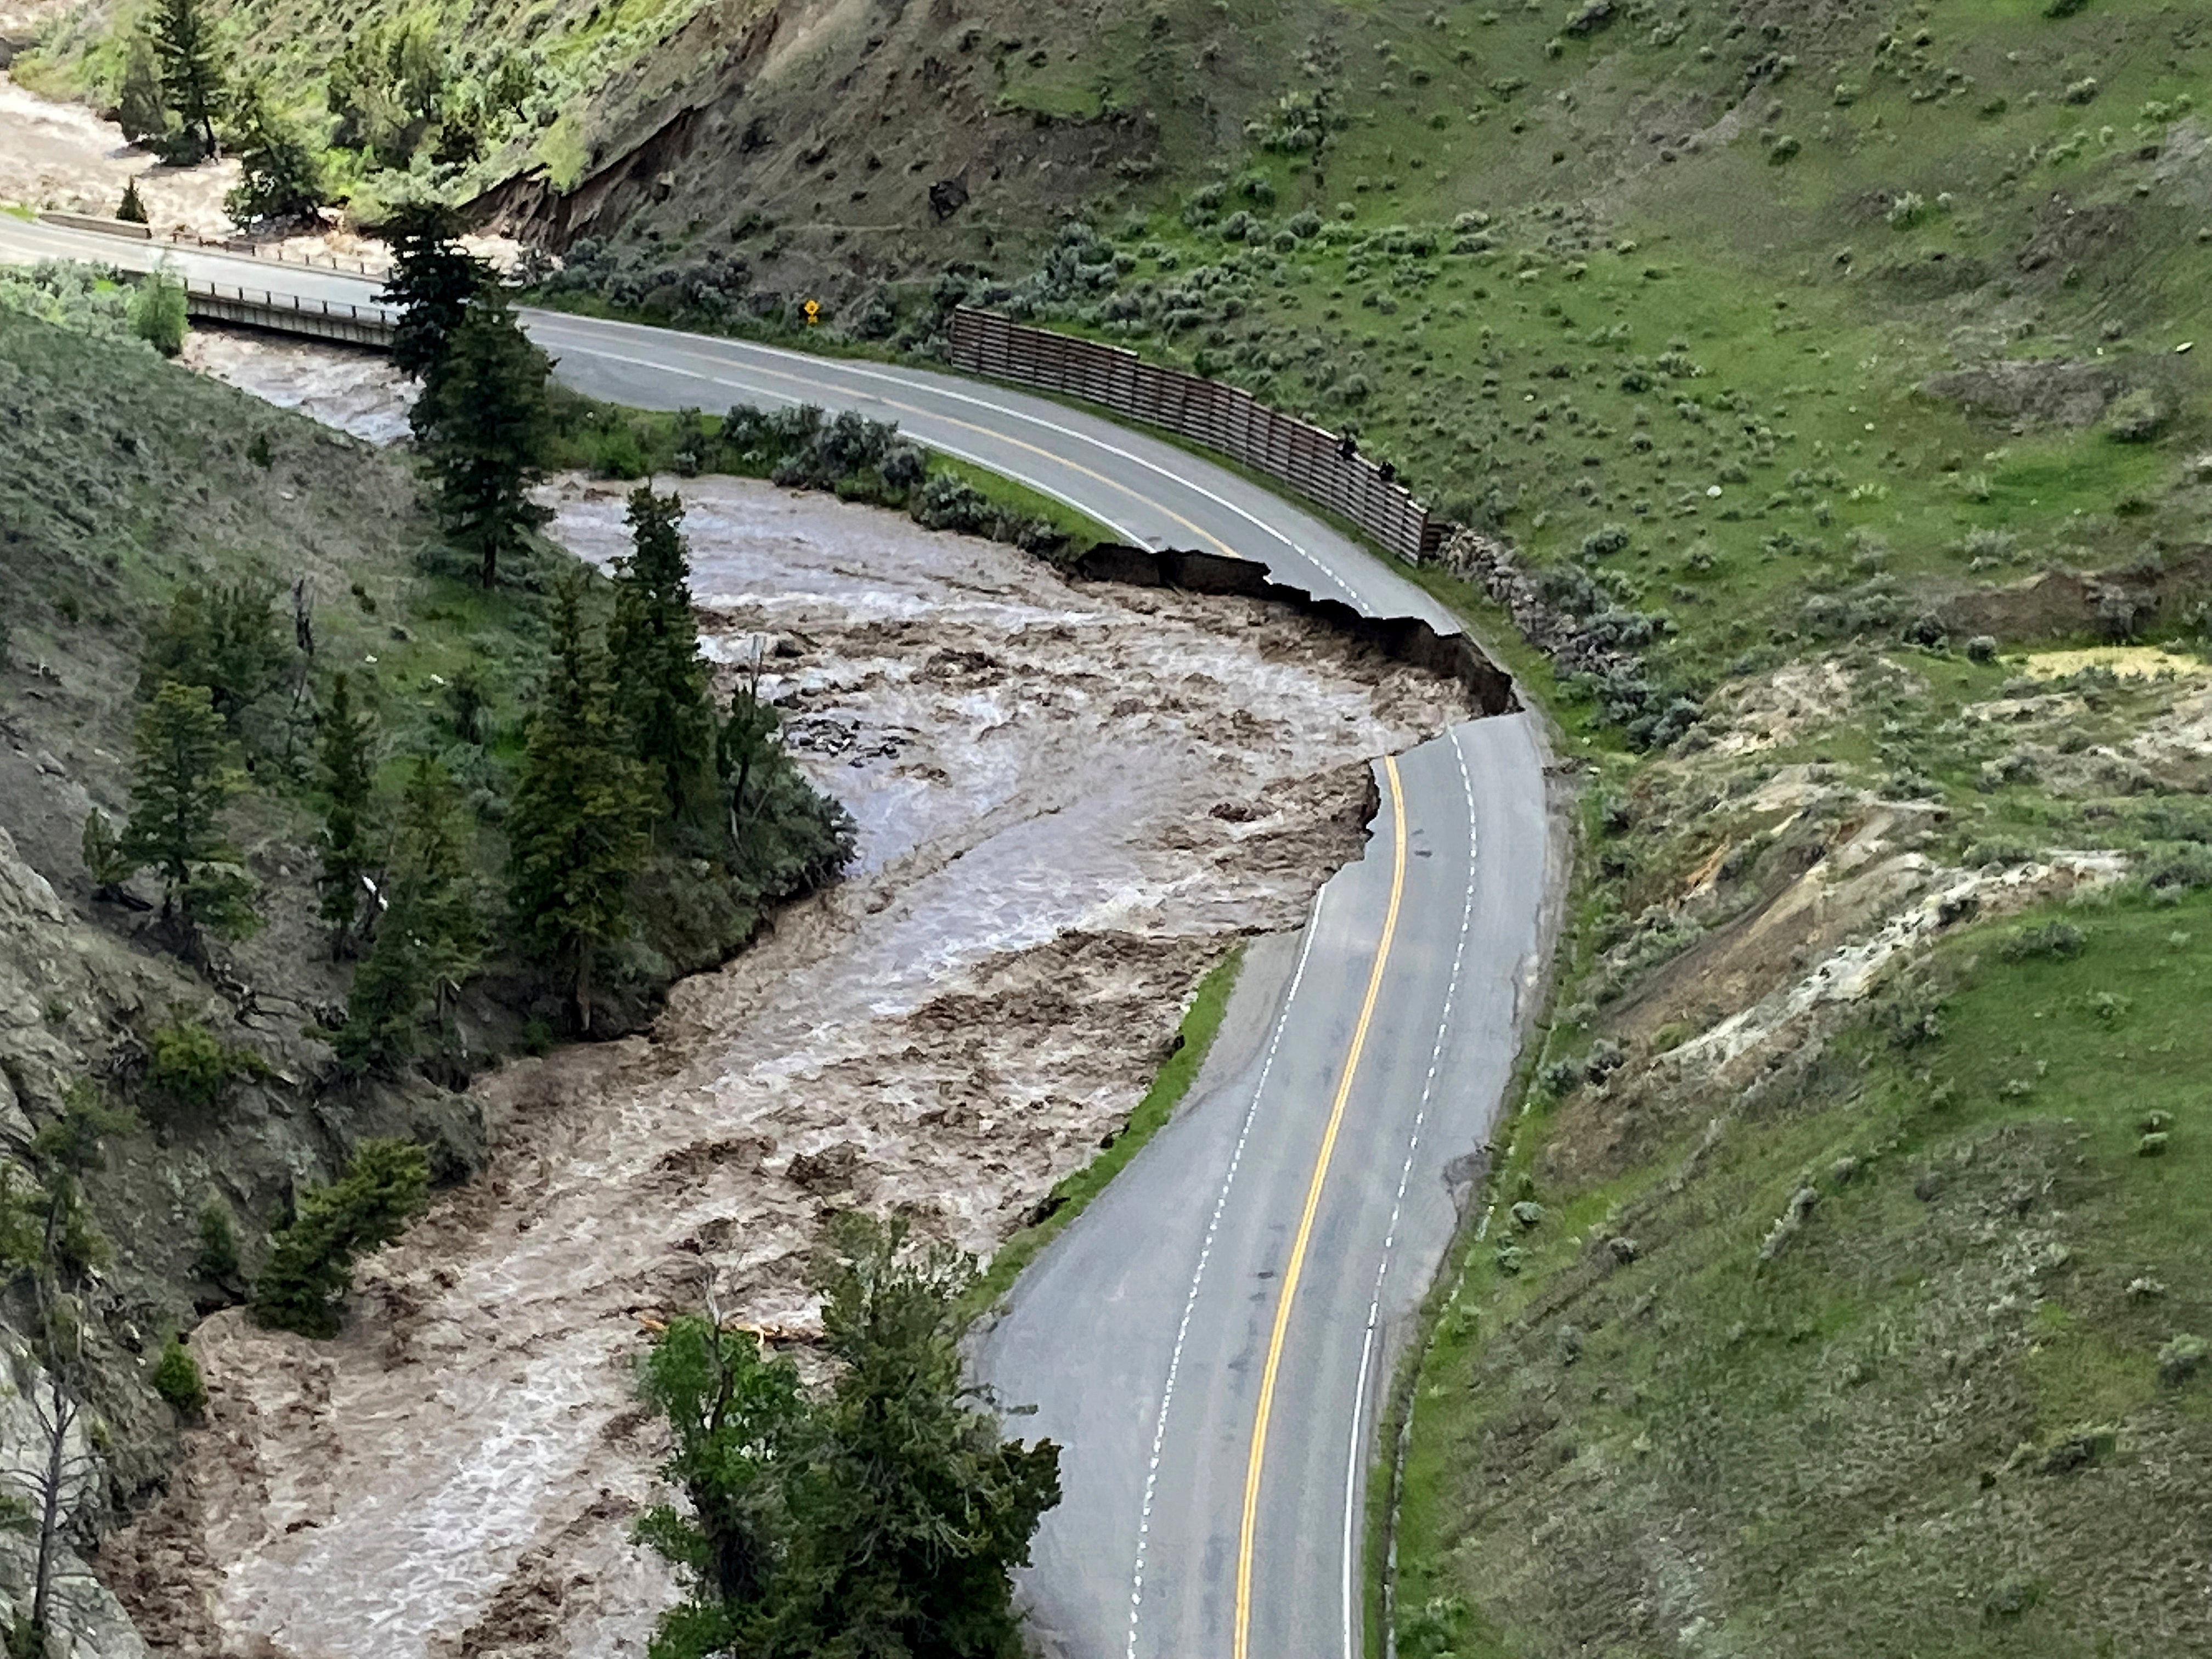 Yellowstone Wrecked by ‘Thousand-Year’ Floods